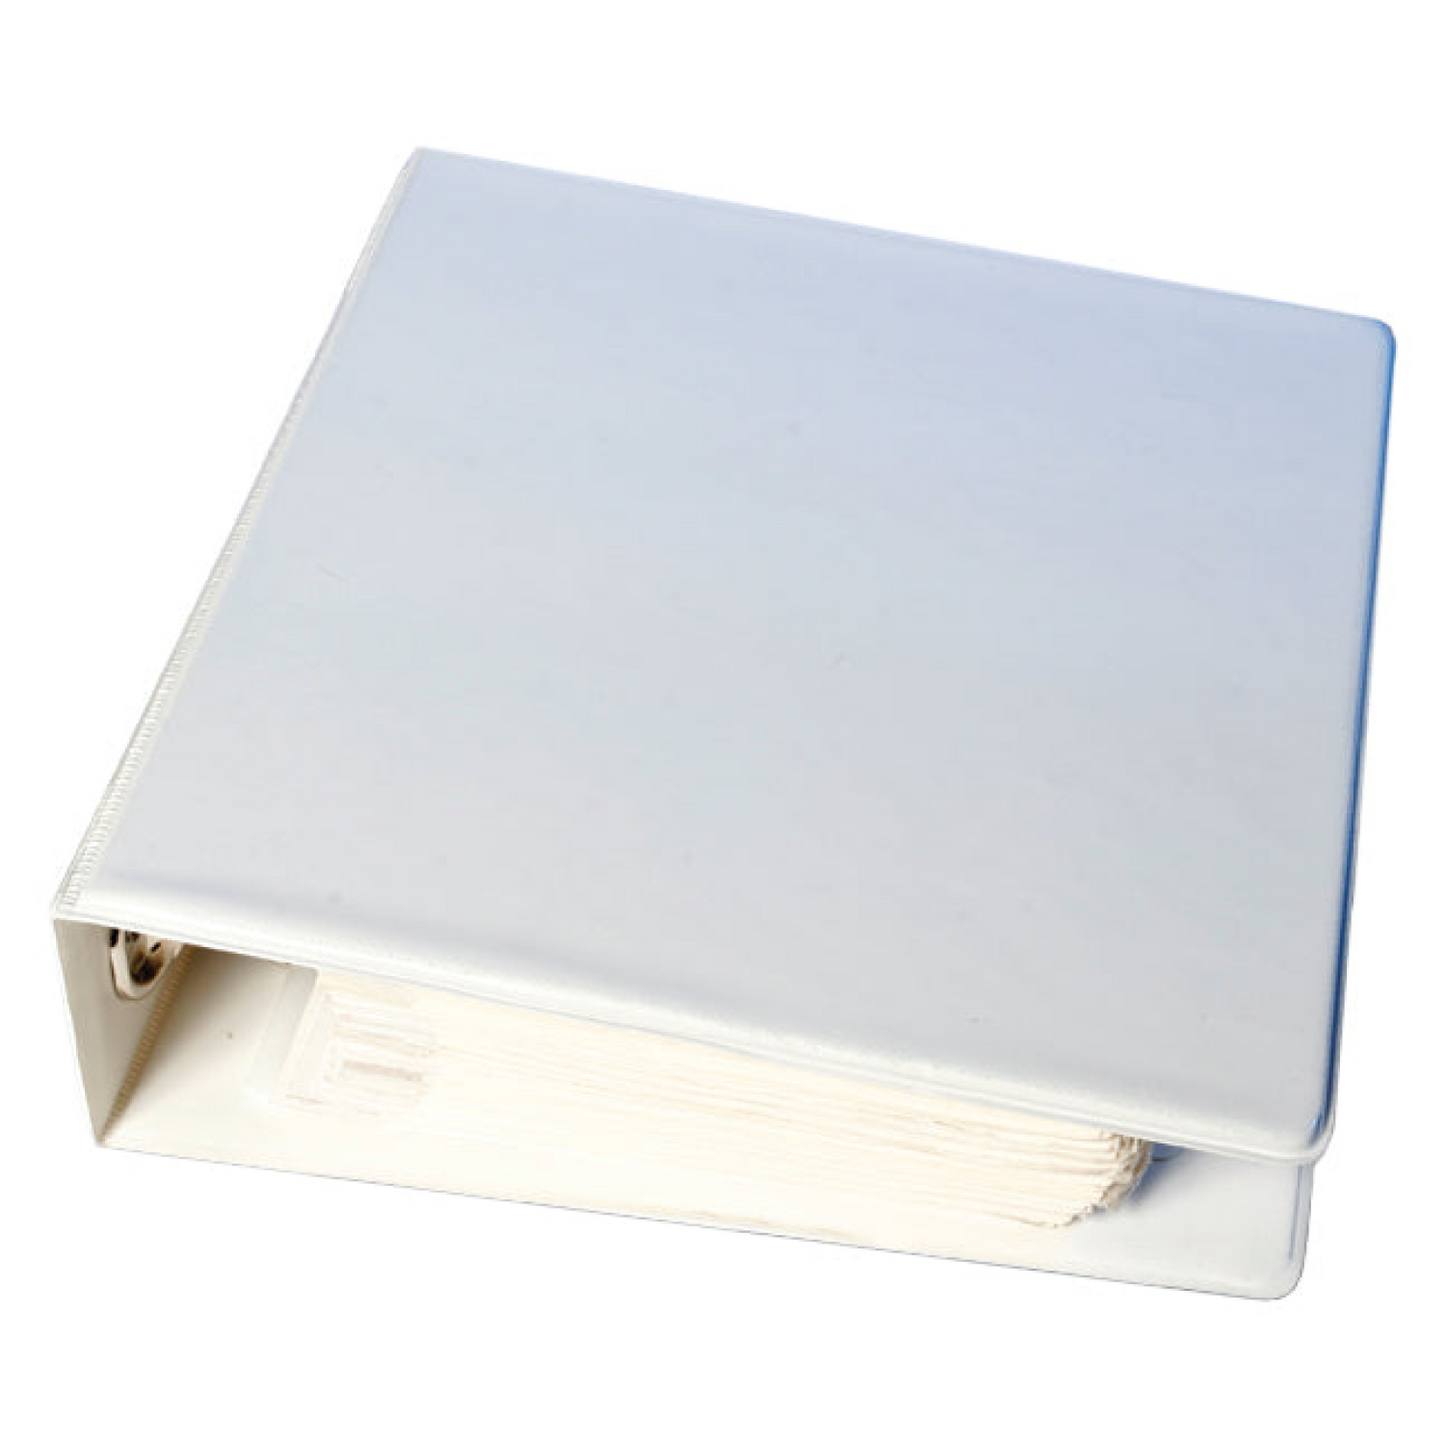 Vinyl Binder for Ring Book Color-Code Items (White)